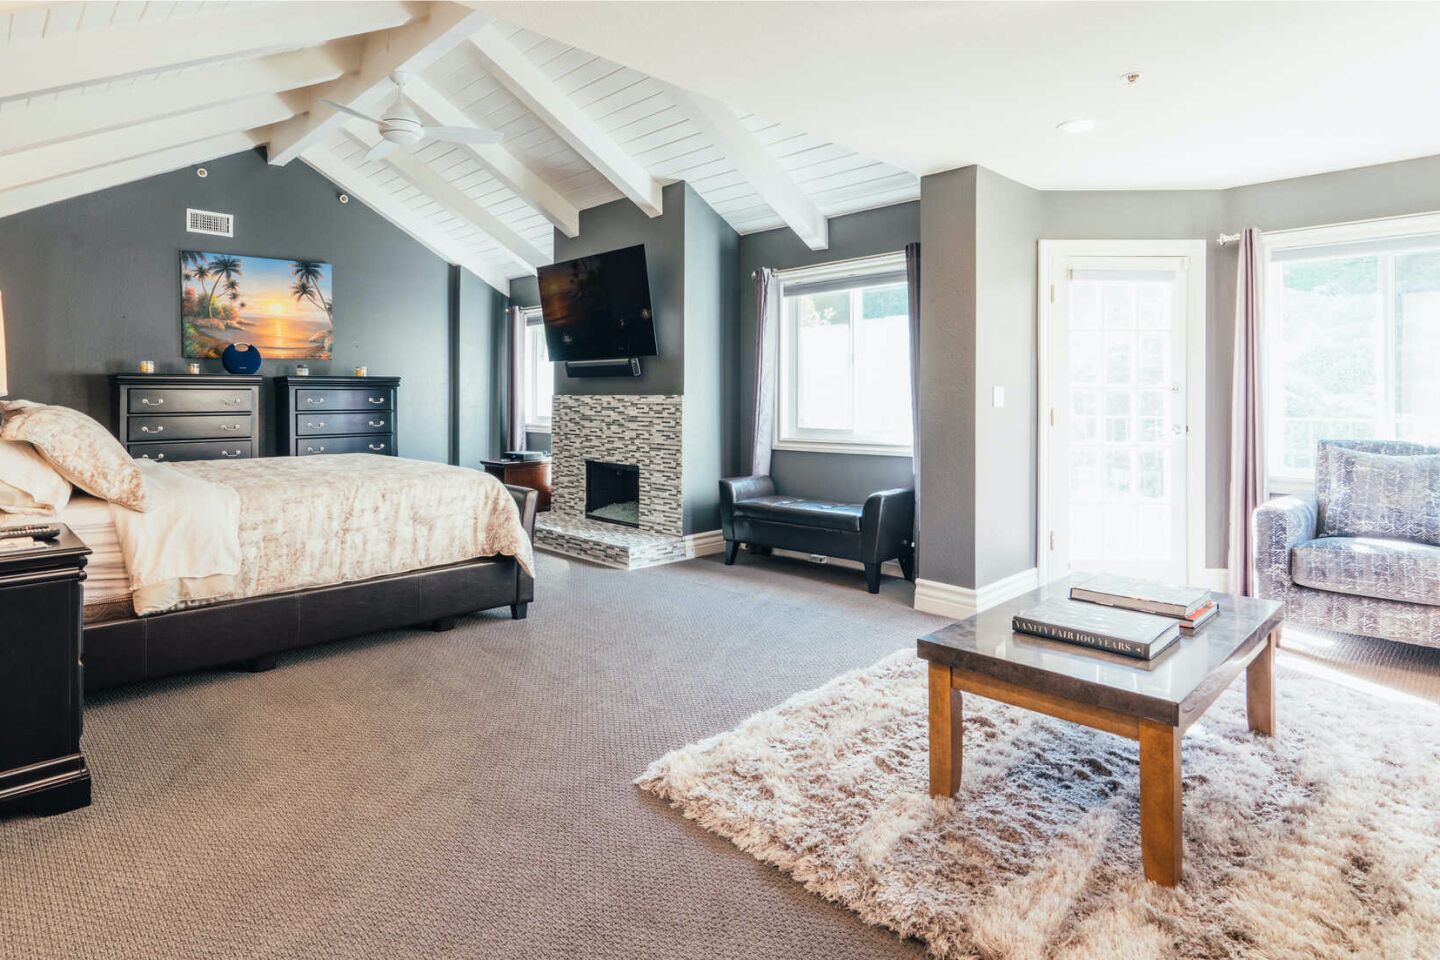 White beamed ceilings, big windows and a sitting room in the master suite.